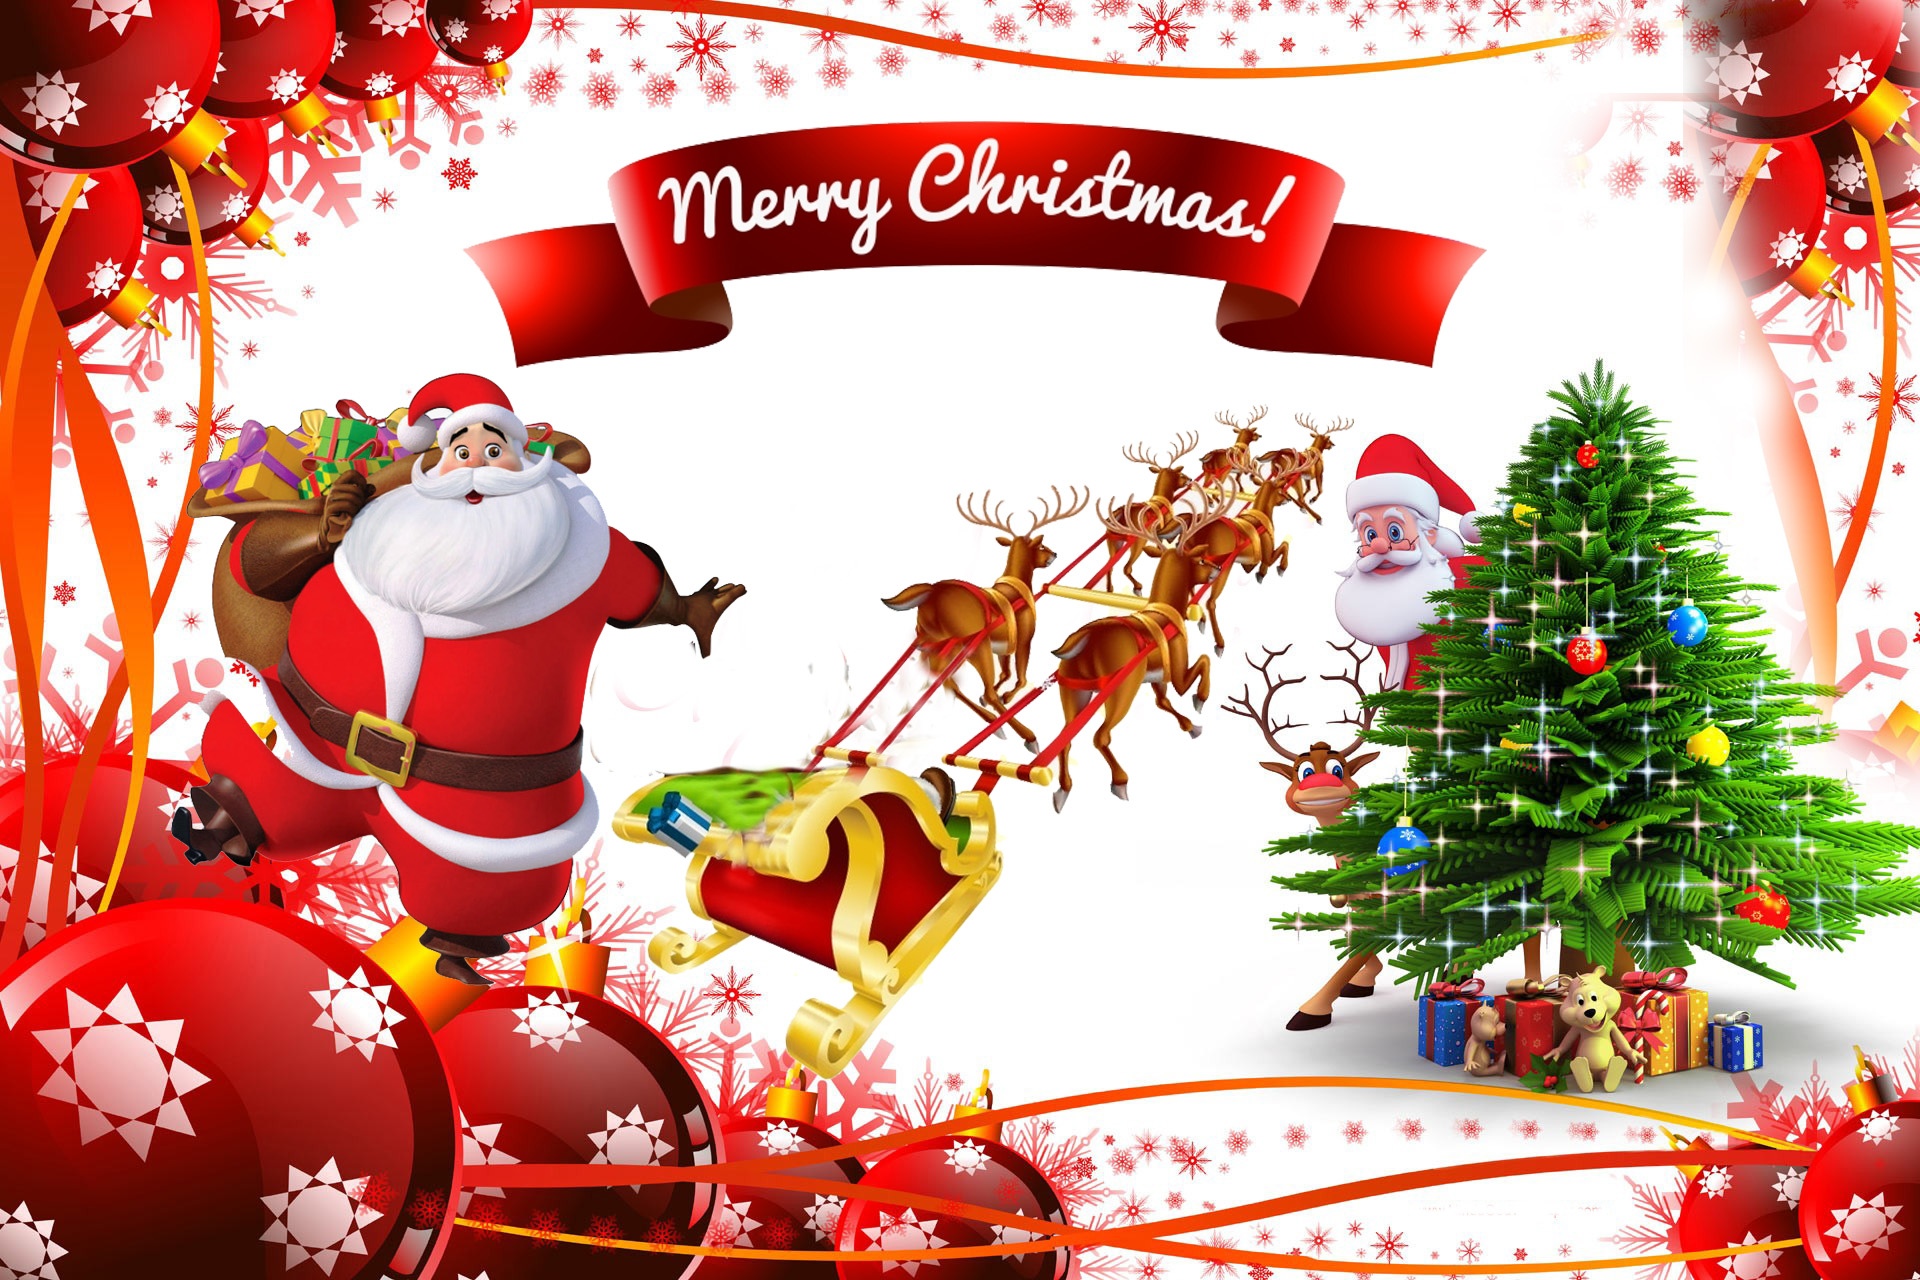 Merry Christmas Images 2019 - HD Wallpaper 